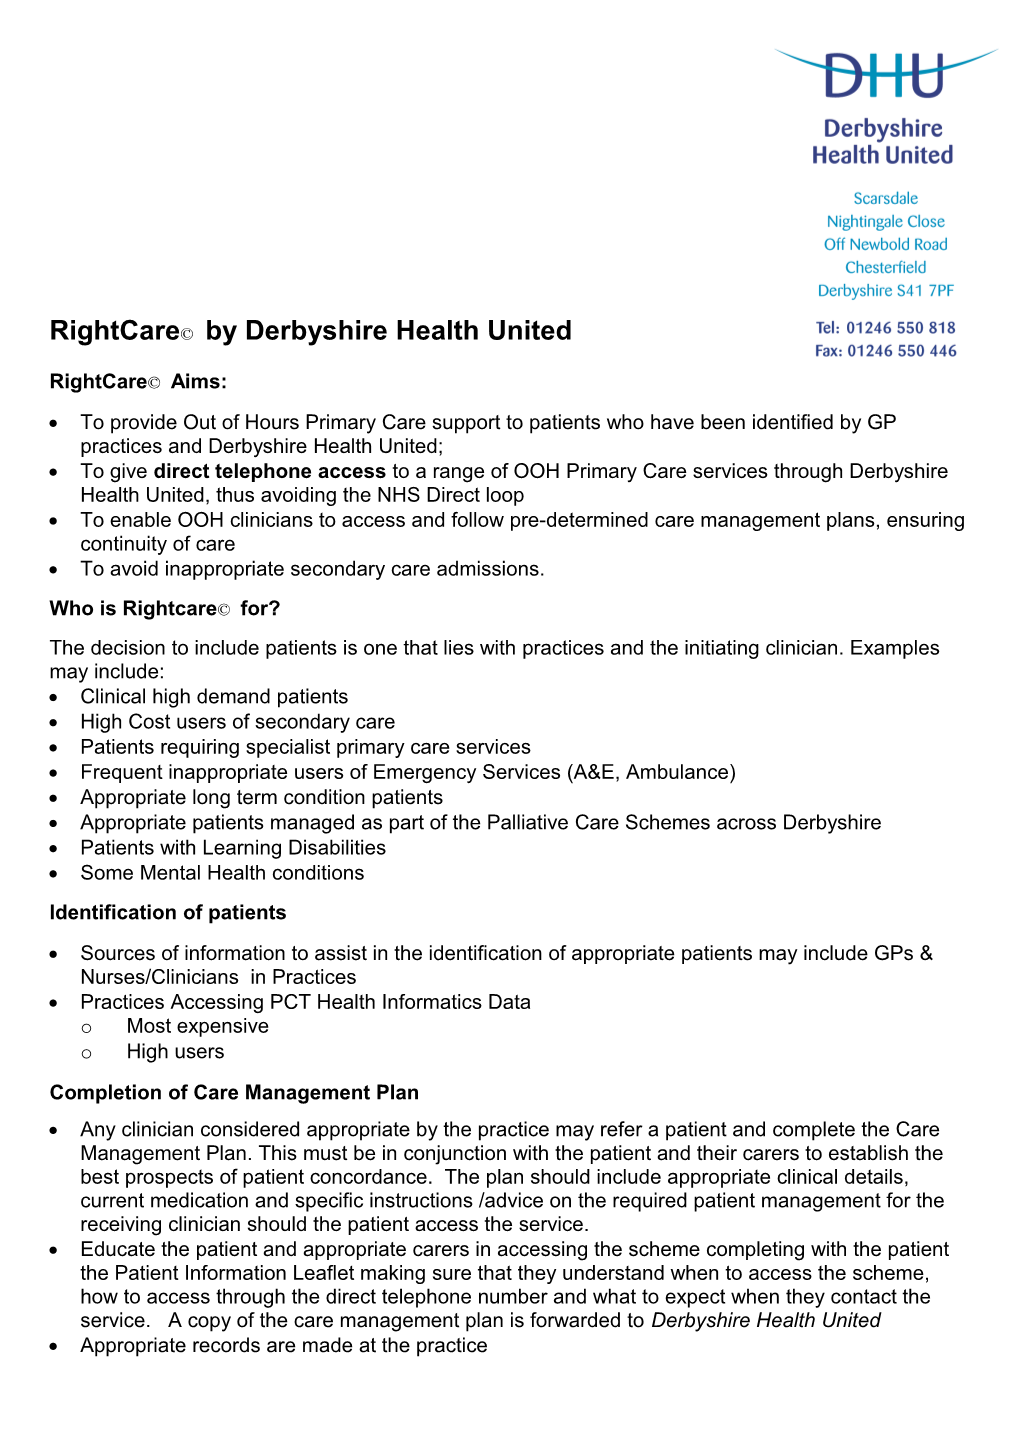 Briefing Note: Rightcare by Derbyshire Health United